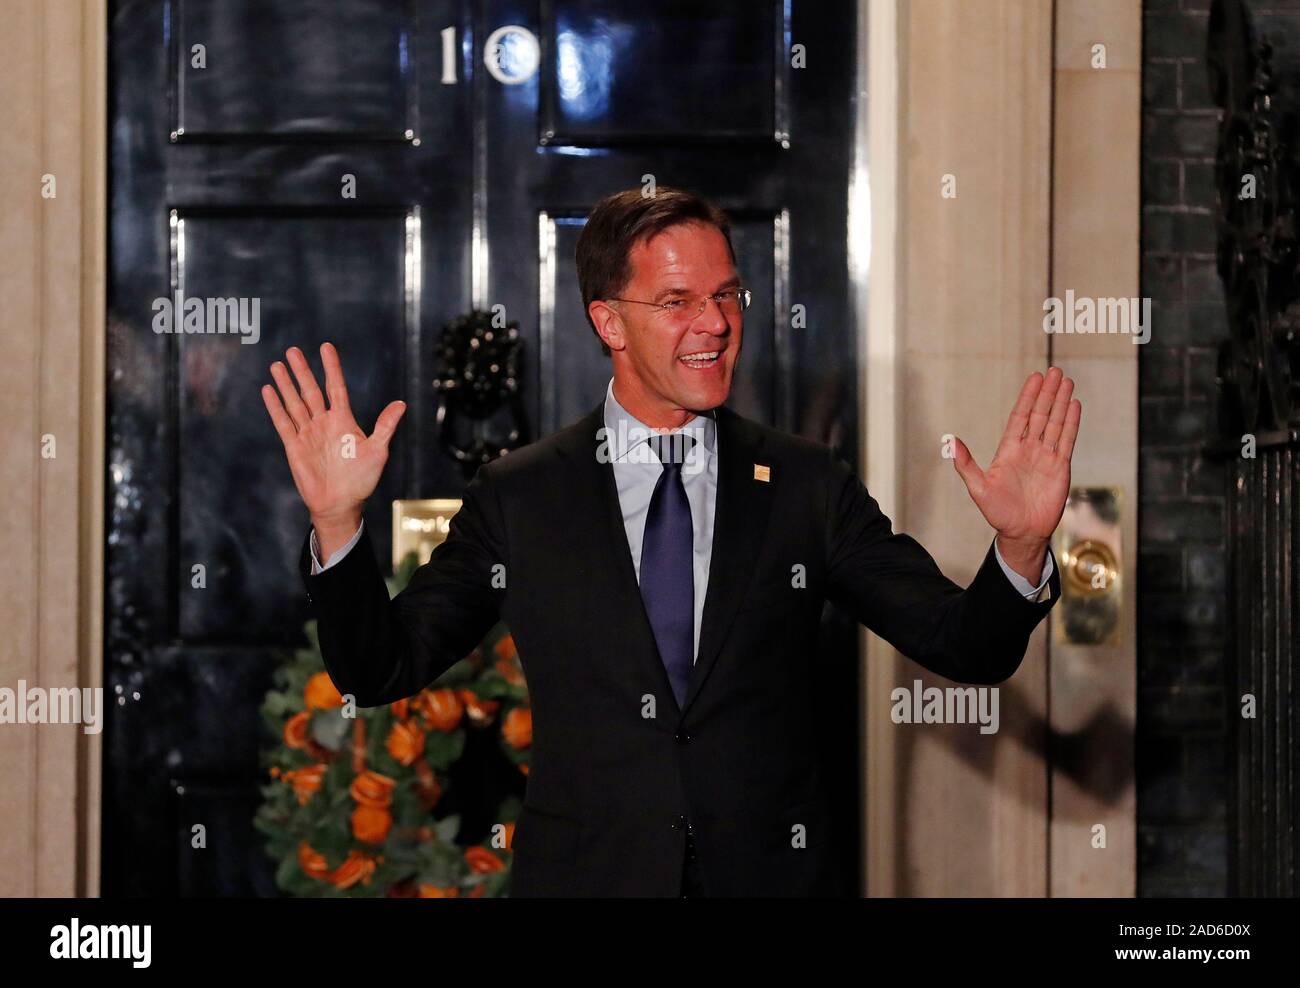 Netherland's Prime Minister Mark Rutte arriving for an evening reception for Nato leaders hosted by Prime Minister Boris Johnson at 10 Downing Street London, as Nato leaders gather to mark 70 years of the alliance. Stock Photo